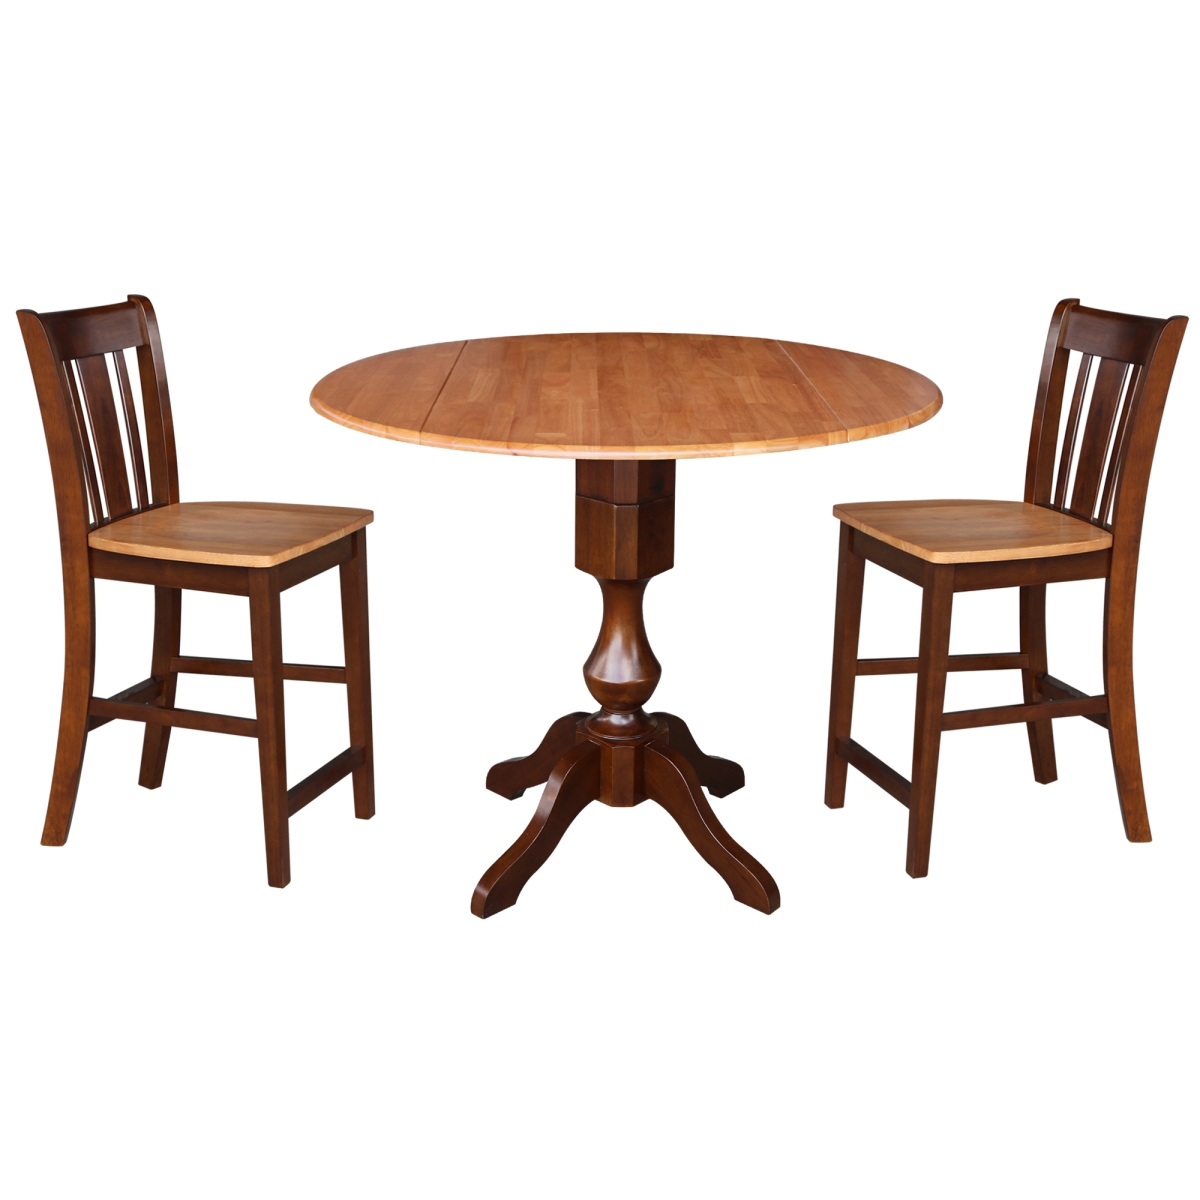 K58-42dpt-11p-s102-2 42 In. Round Pedestal Gathering Height Table With 2 Counter Height Stools - Cinnemon & Espresso